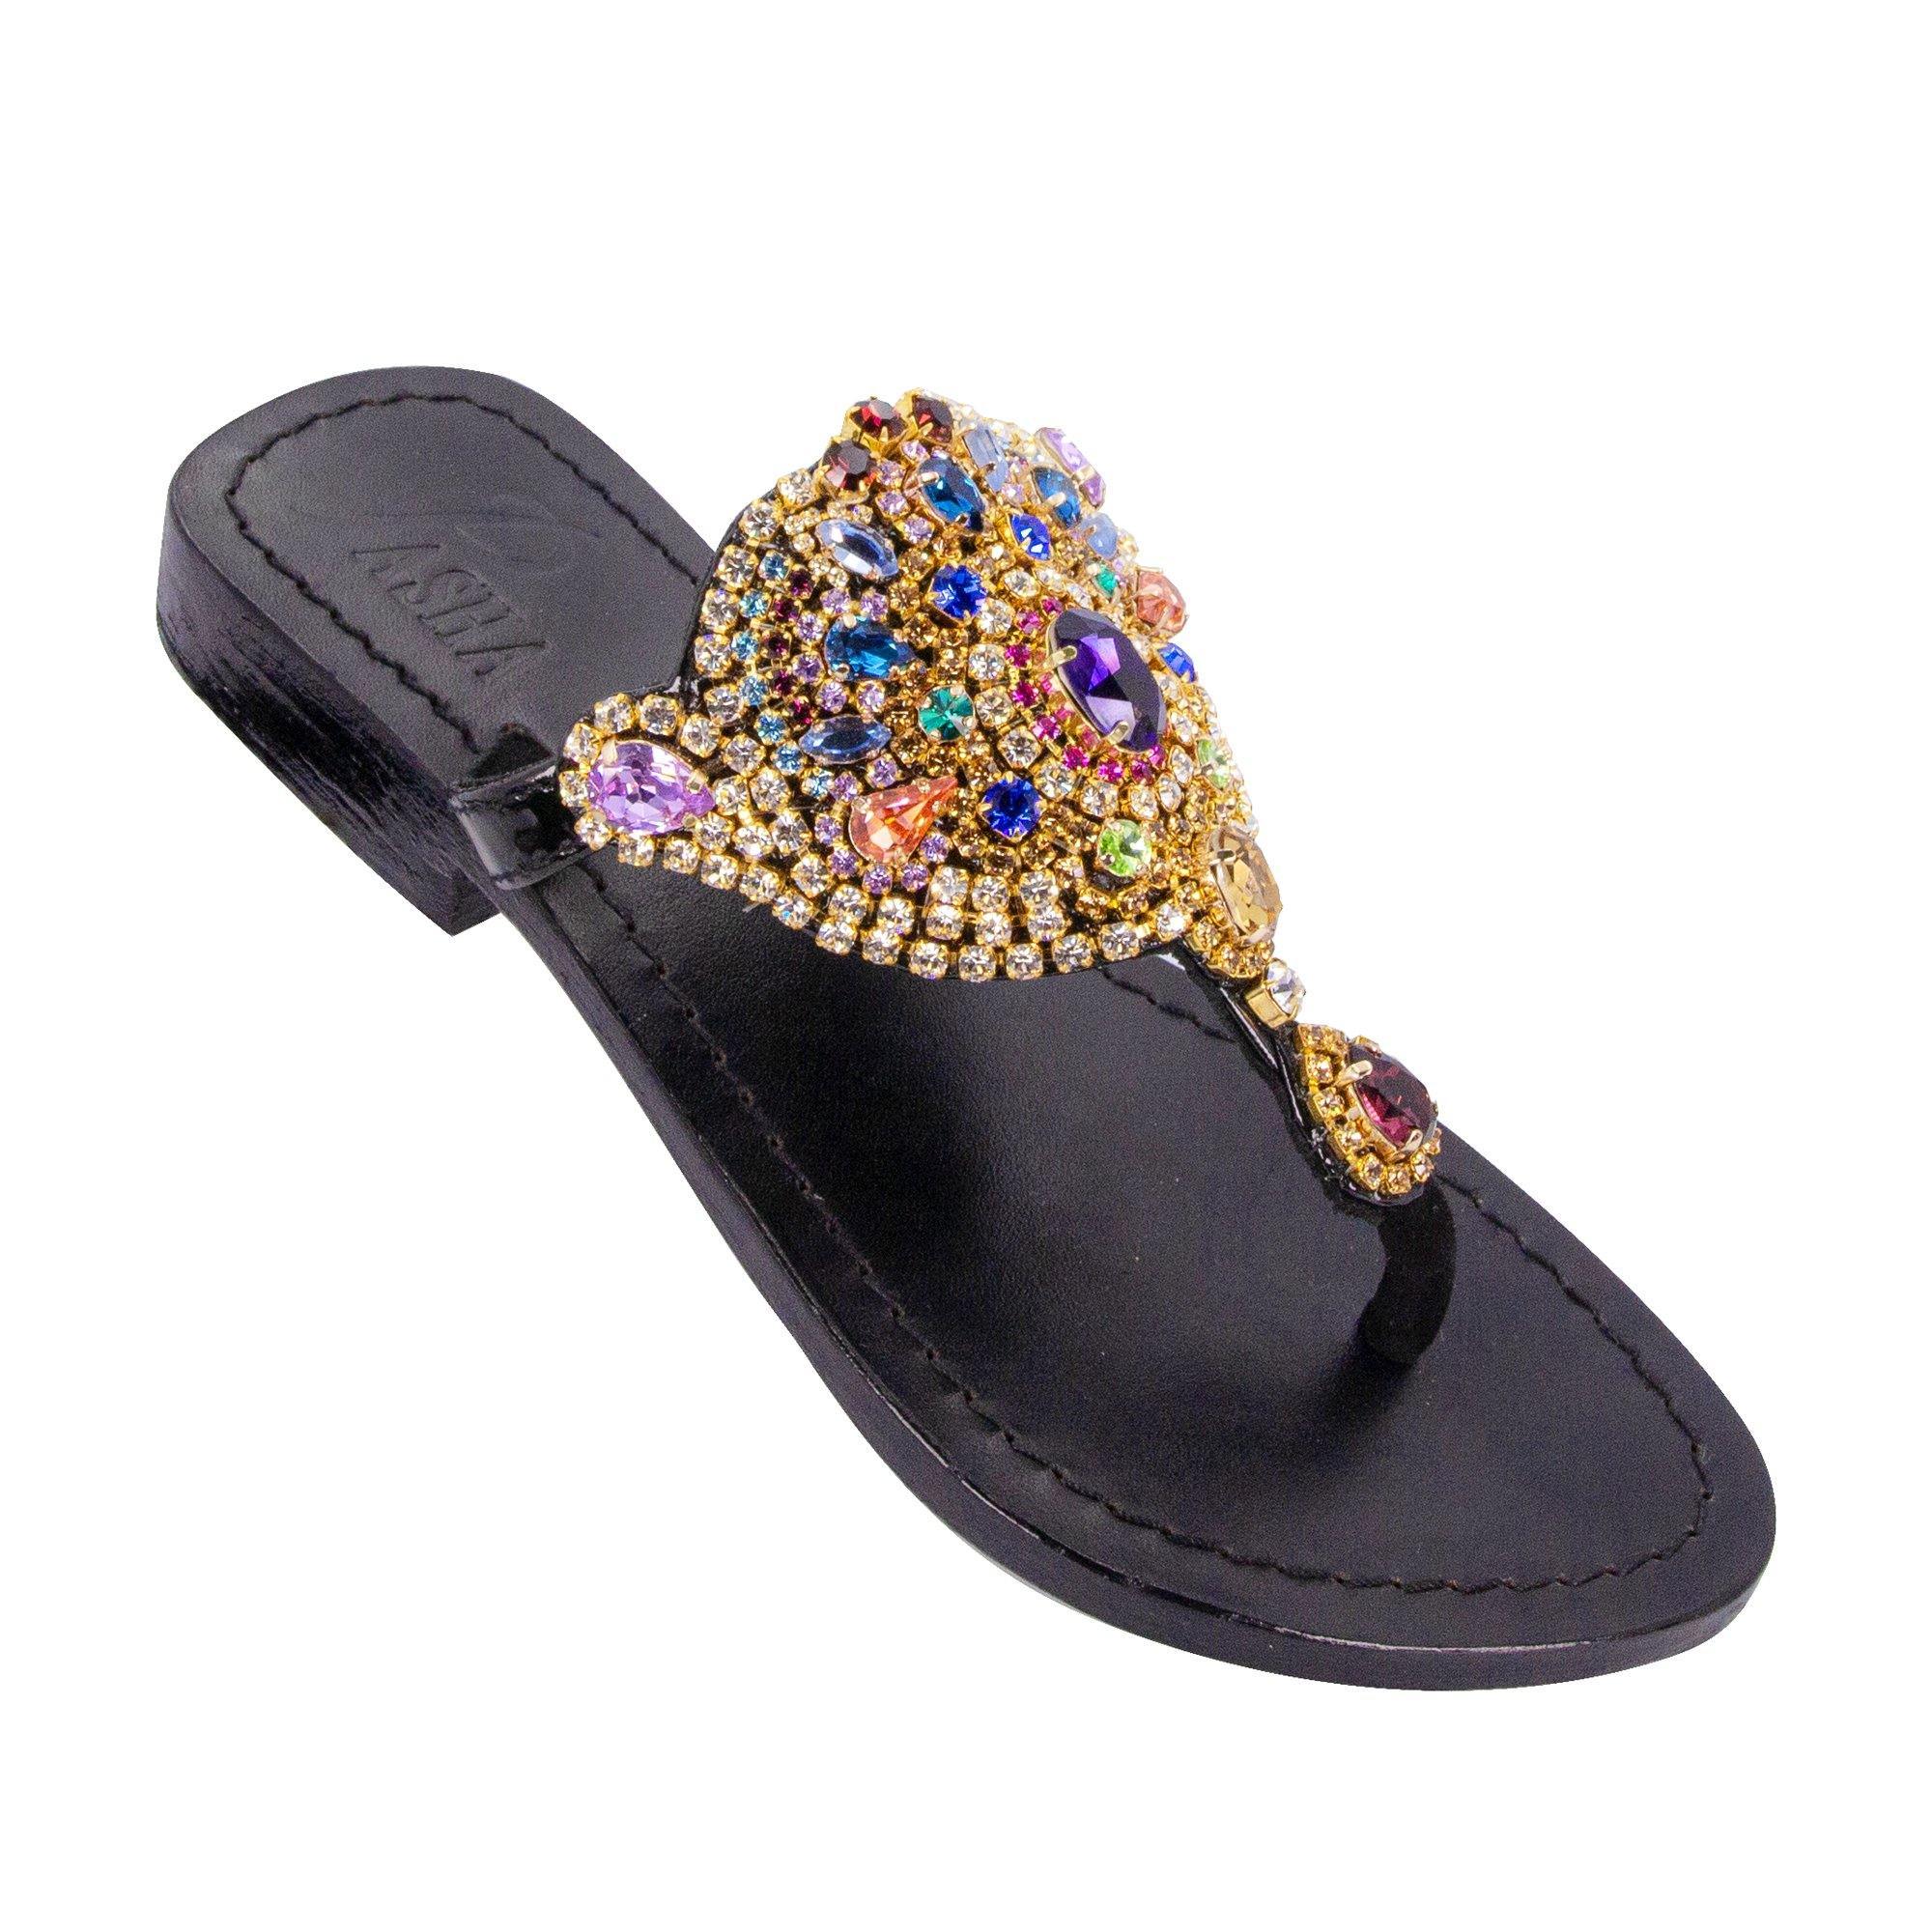 PANAY - Pasha Sandals - Jewelry for your feet - 